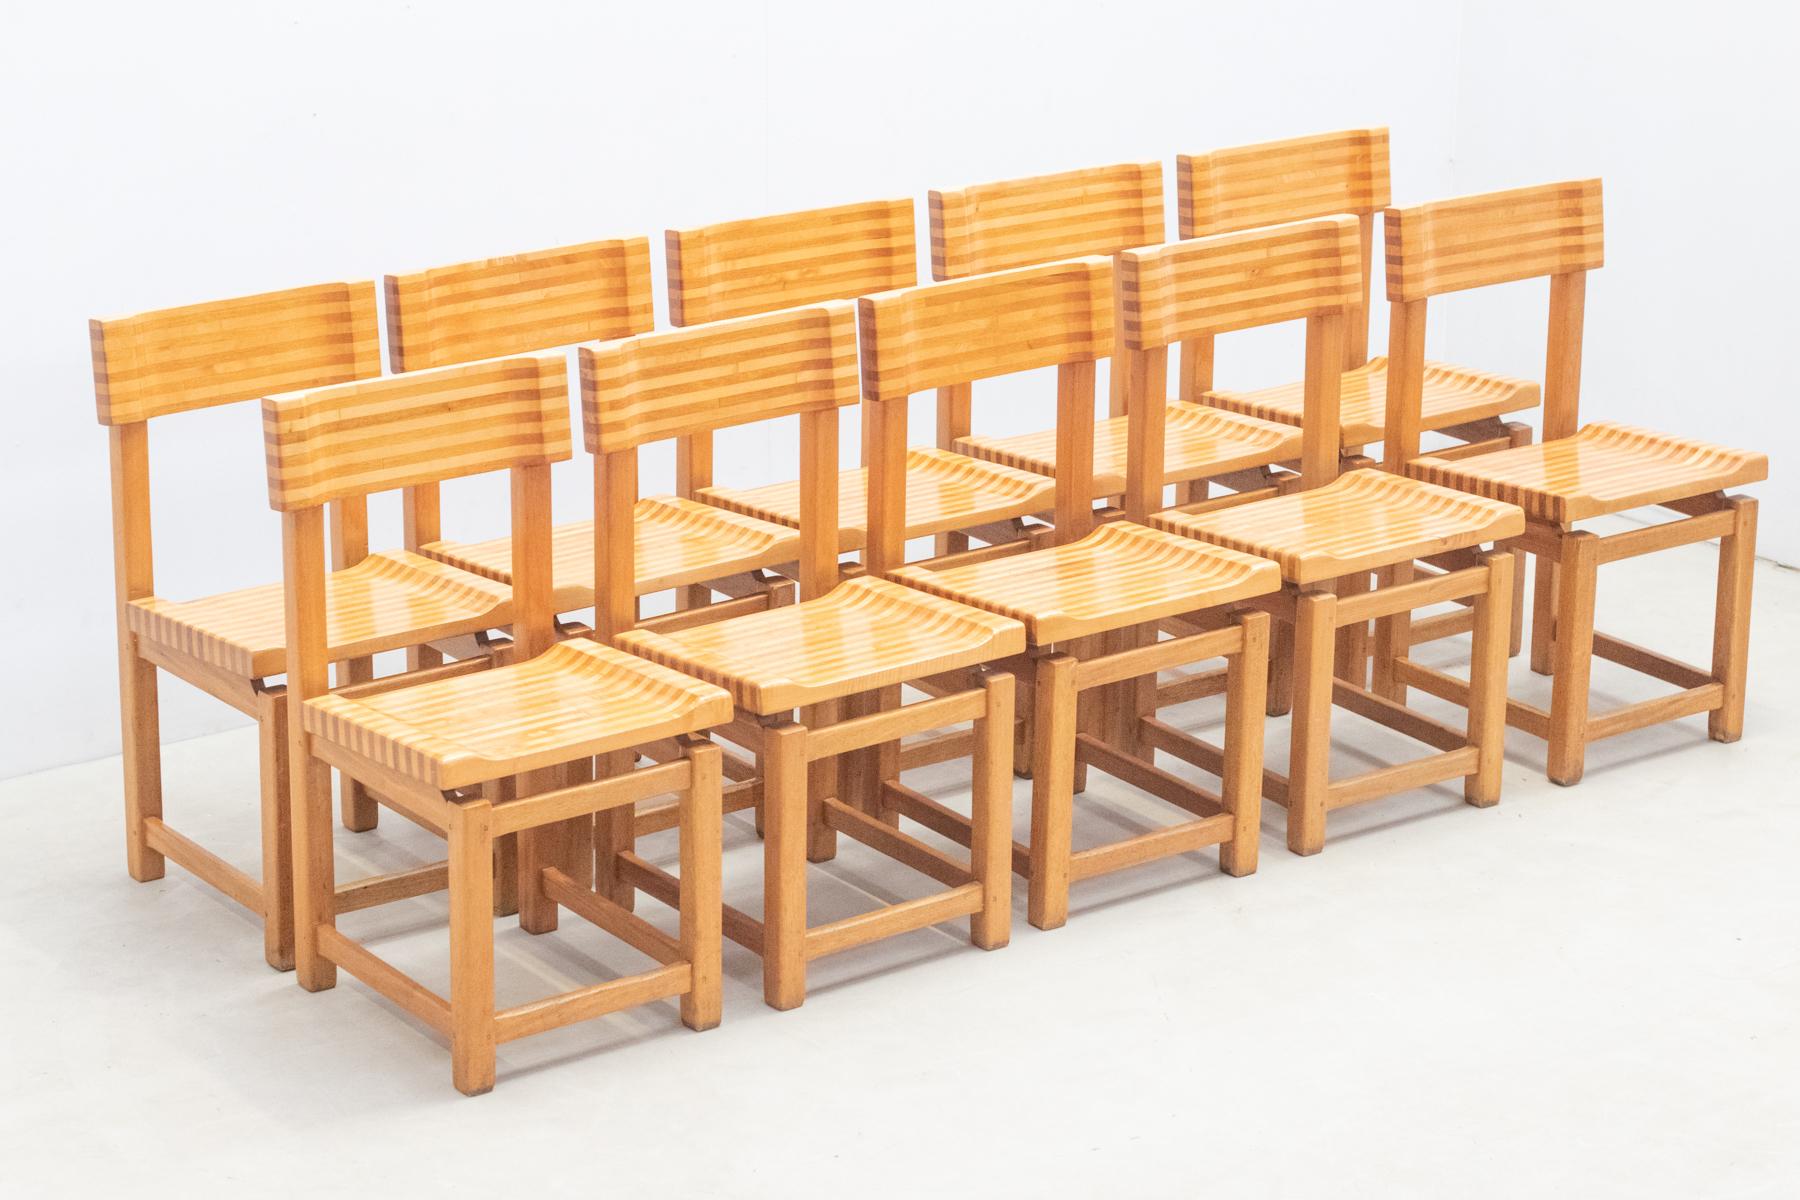 Set of 10 multilayer solid wooden chairs from France, 1970s. 
 The seats and backs of these chairs are a testament to meticulous craftsmanship and artistic ingenuity. Crafted from two solid woods in contrasting colors, the multi-layered designs add